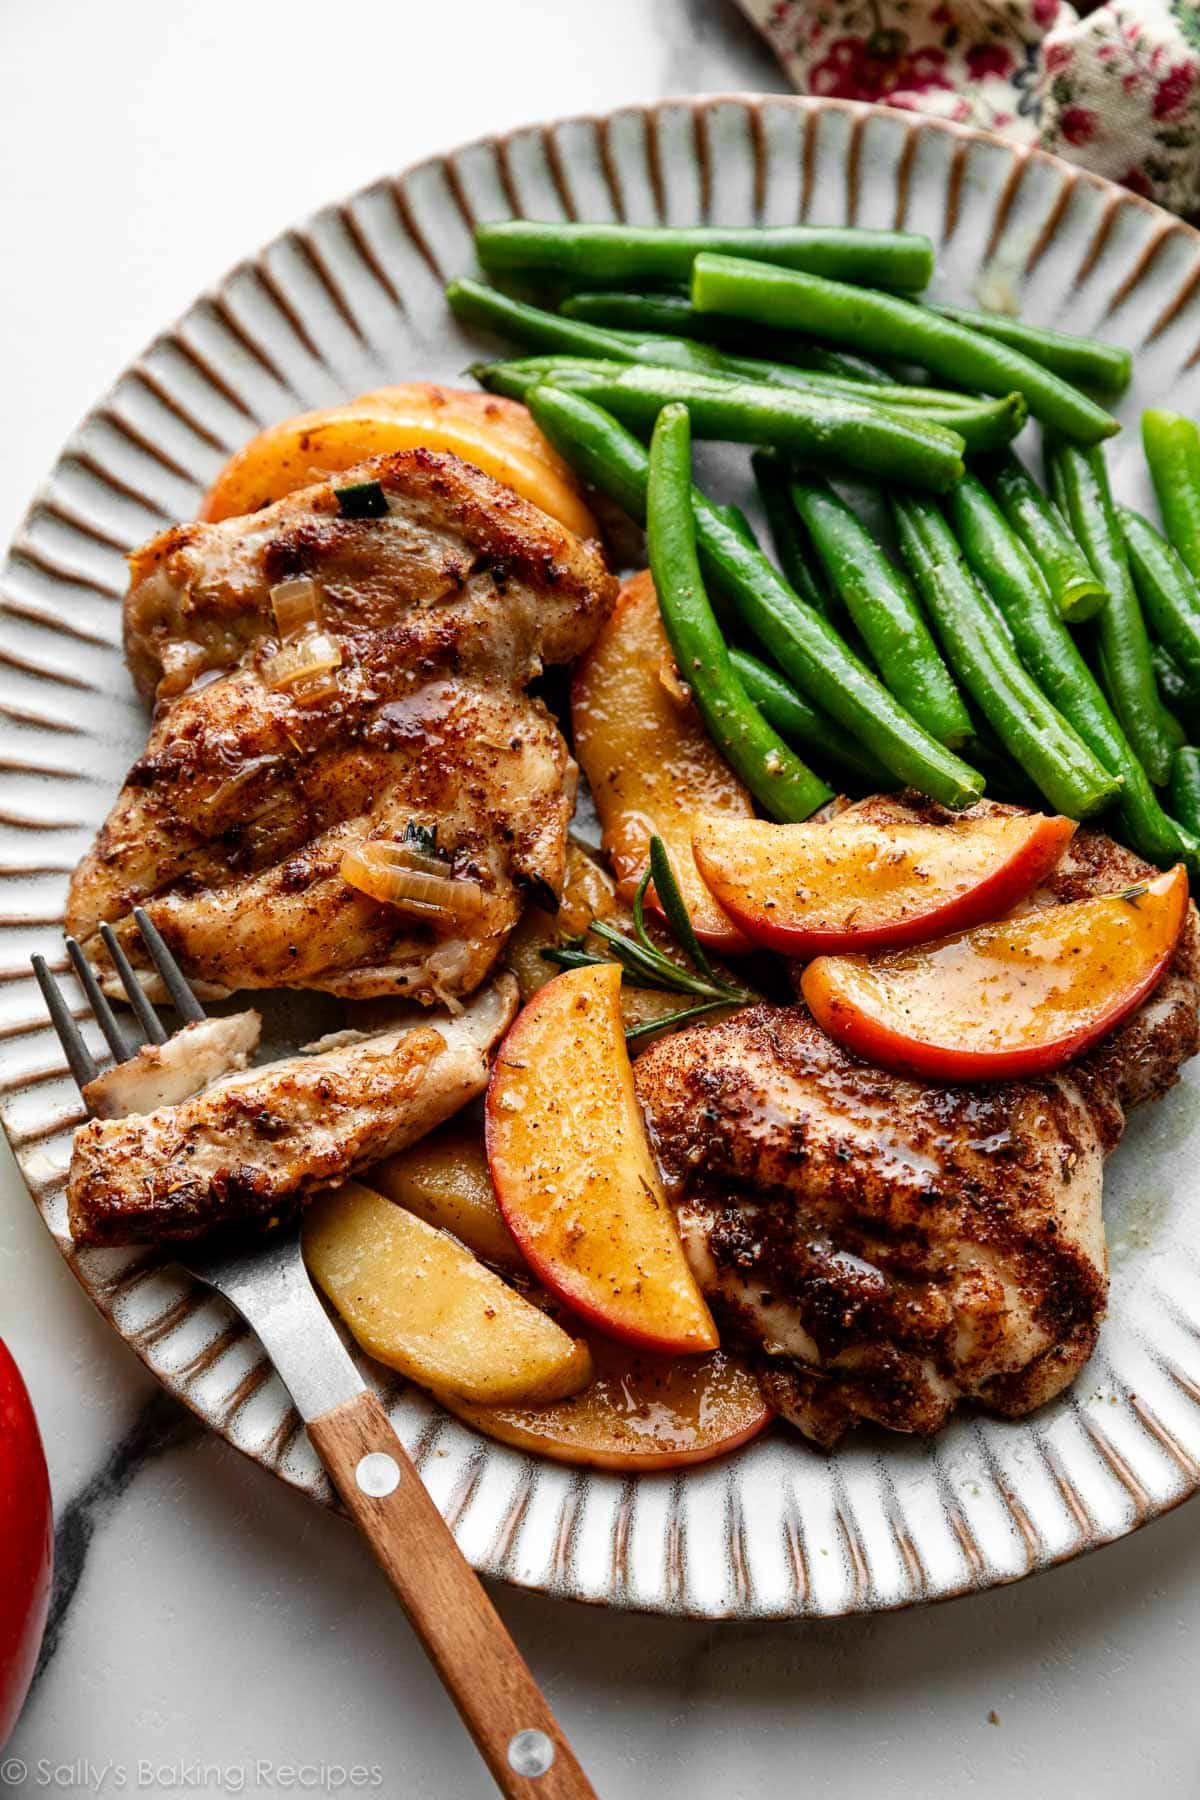 apple cider chicken and apple slices with green beans on plate.